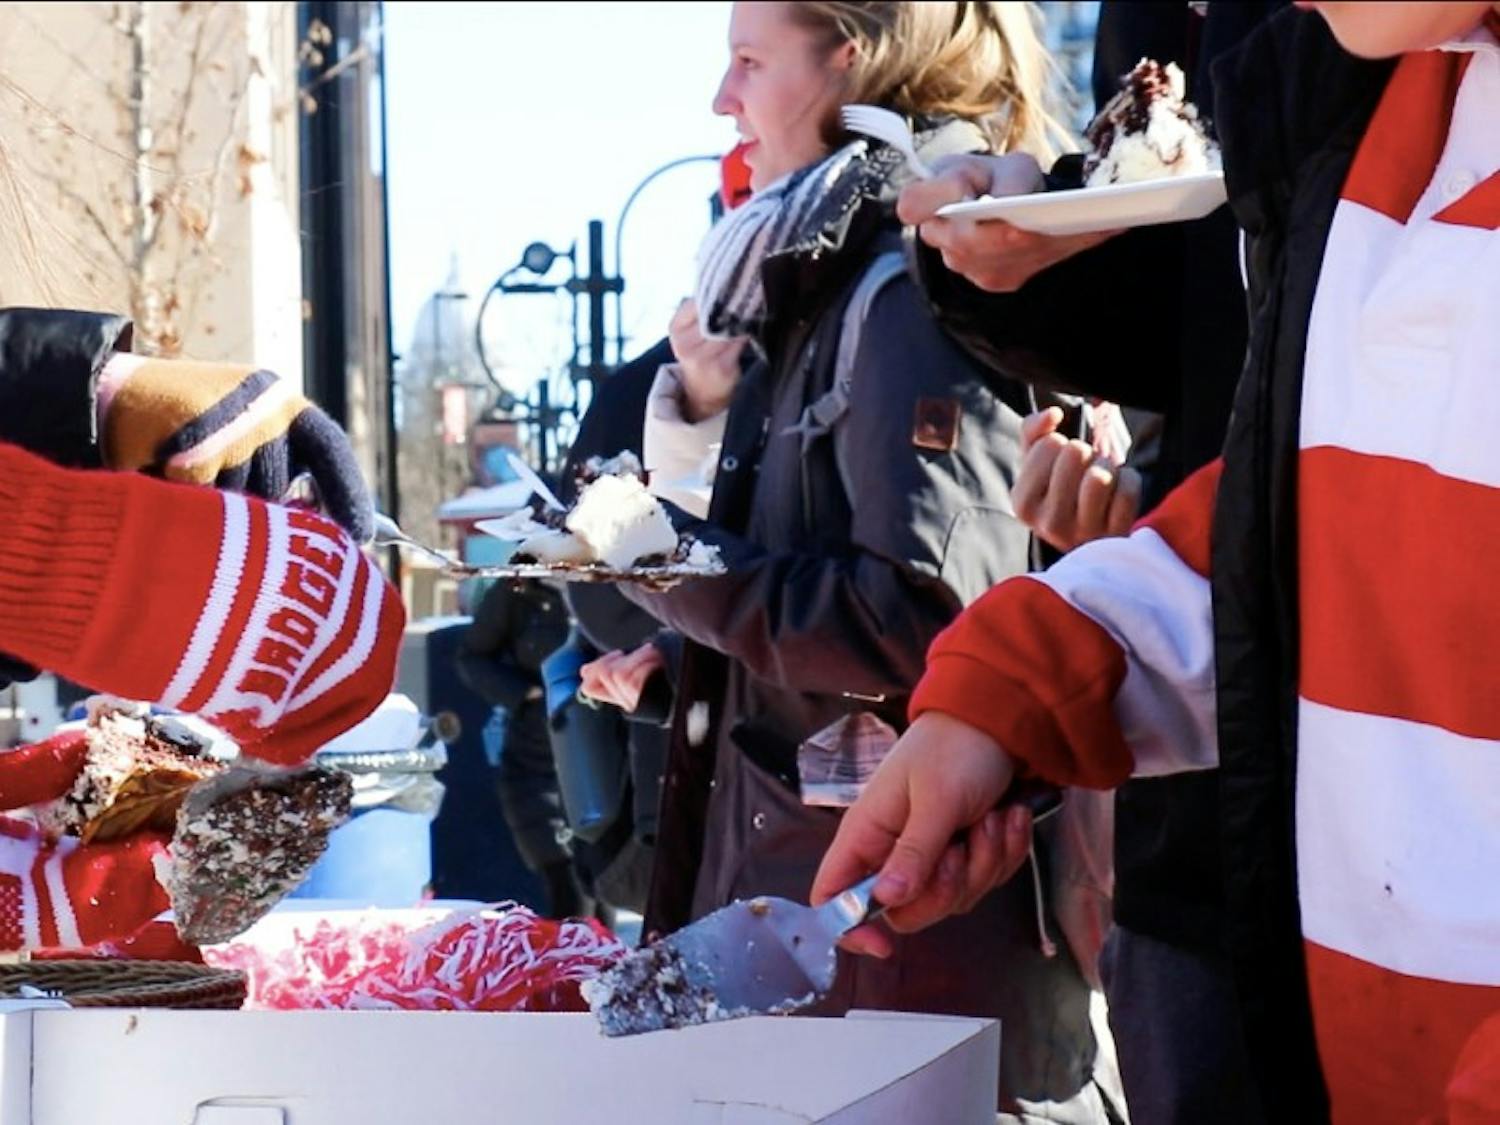 Members of the Wisconsin Alumni Student Board offered free cake and hot chocolate to students Friday to celebrate 168 years of UW-Madison classes on Founder’s Day.